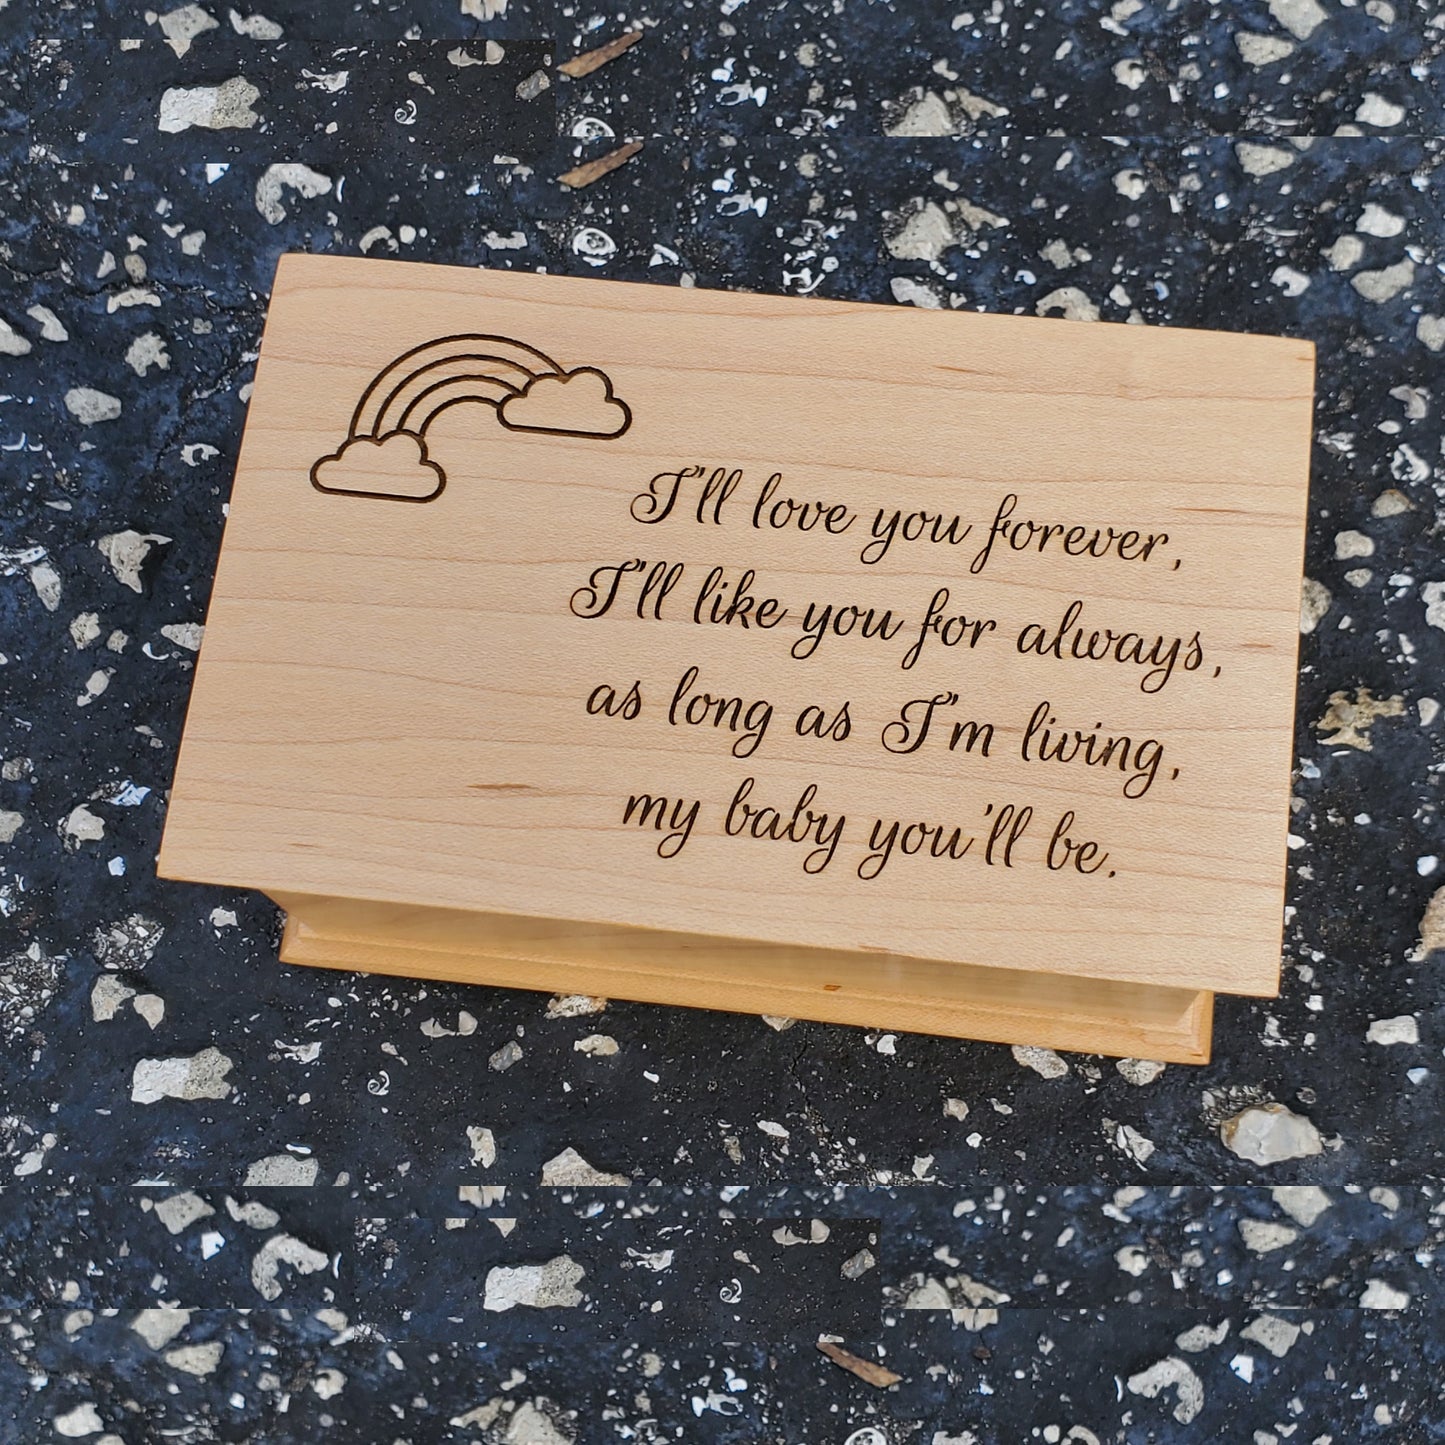 wooden jewelry box with a rainbow design and I'll love you forever engraved on top